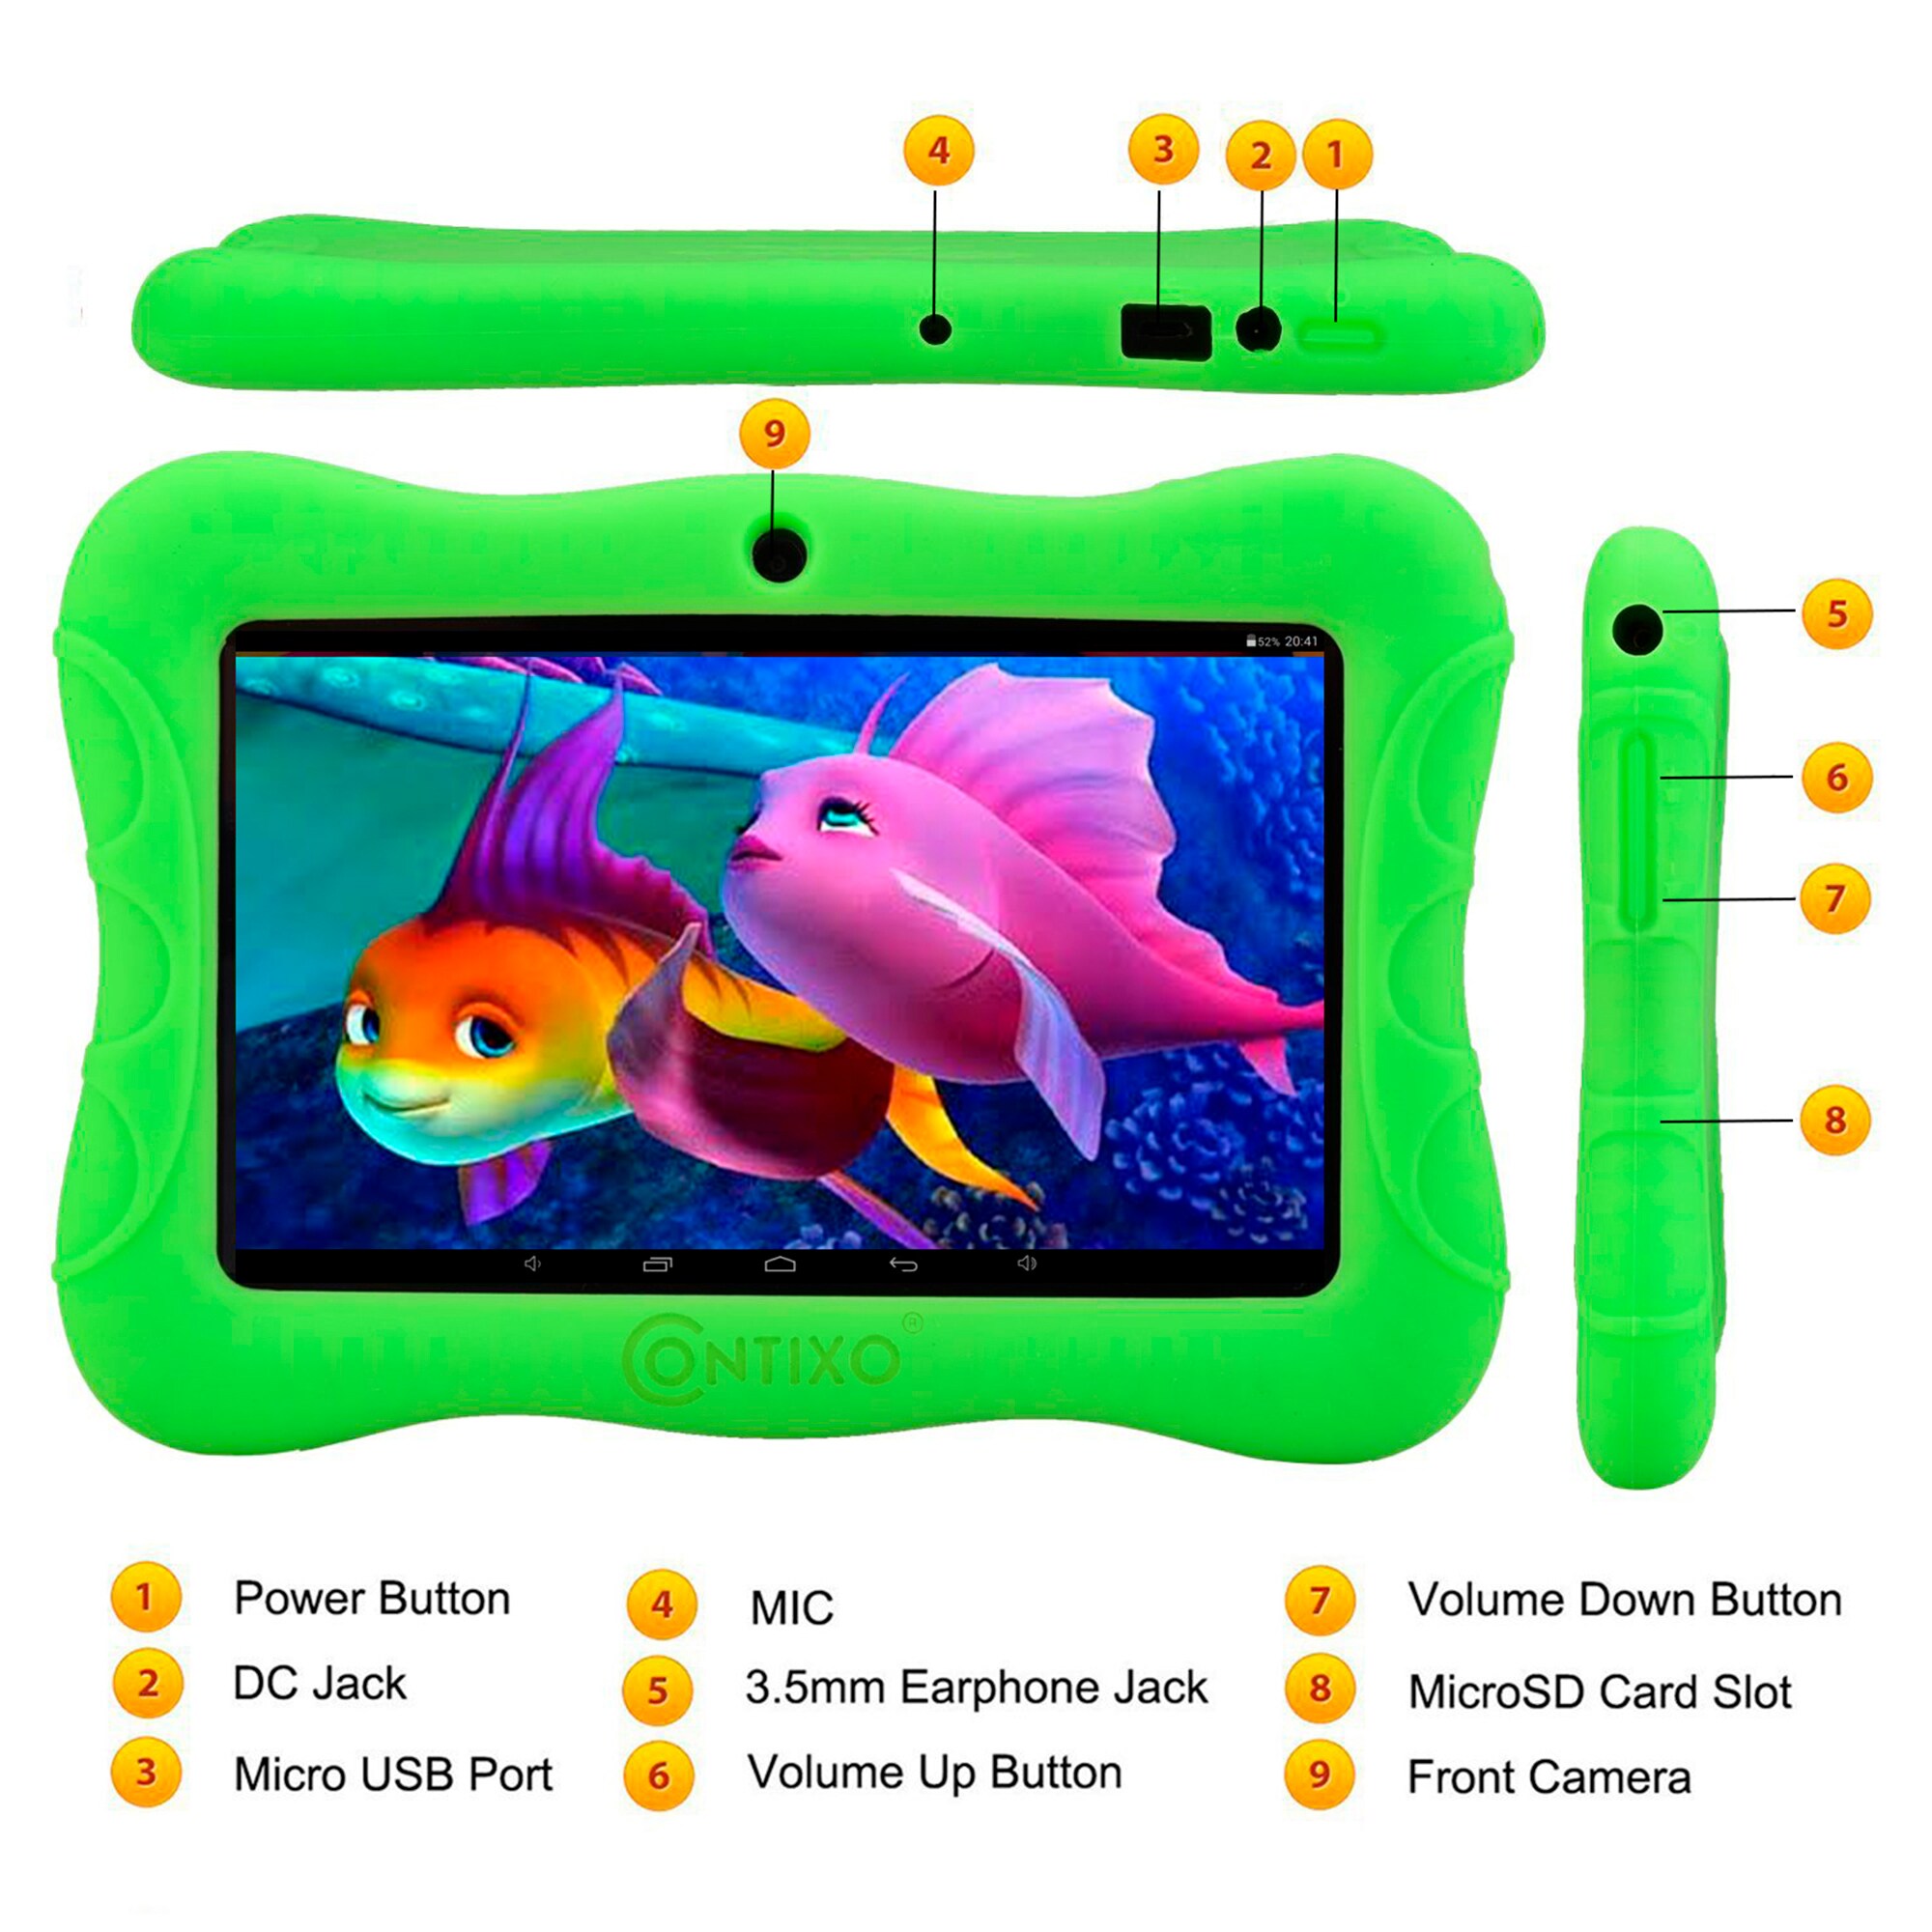 Contixo Contixo 7 inch Kids Tablet 2GB Ram 32GB Data Storage with Latest Android 10 OS Wi-Fi Blue Tooth Tablets for Kids, V9-3-32-Green